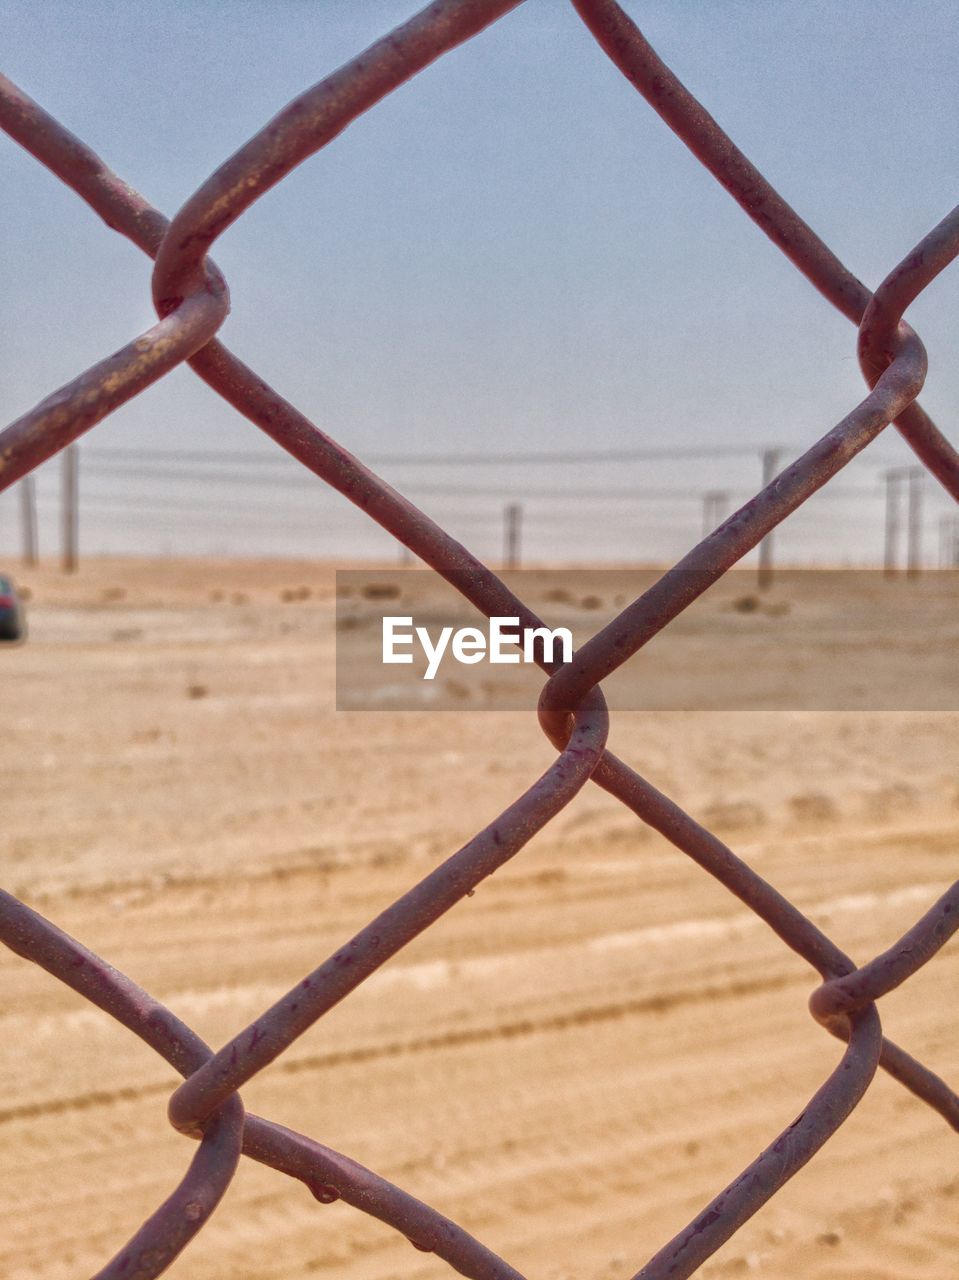 CLOSE-UP OF FENCE AGAINST SKY SEEN THROUGH CHAINLINK